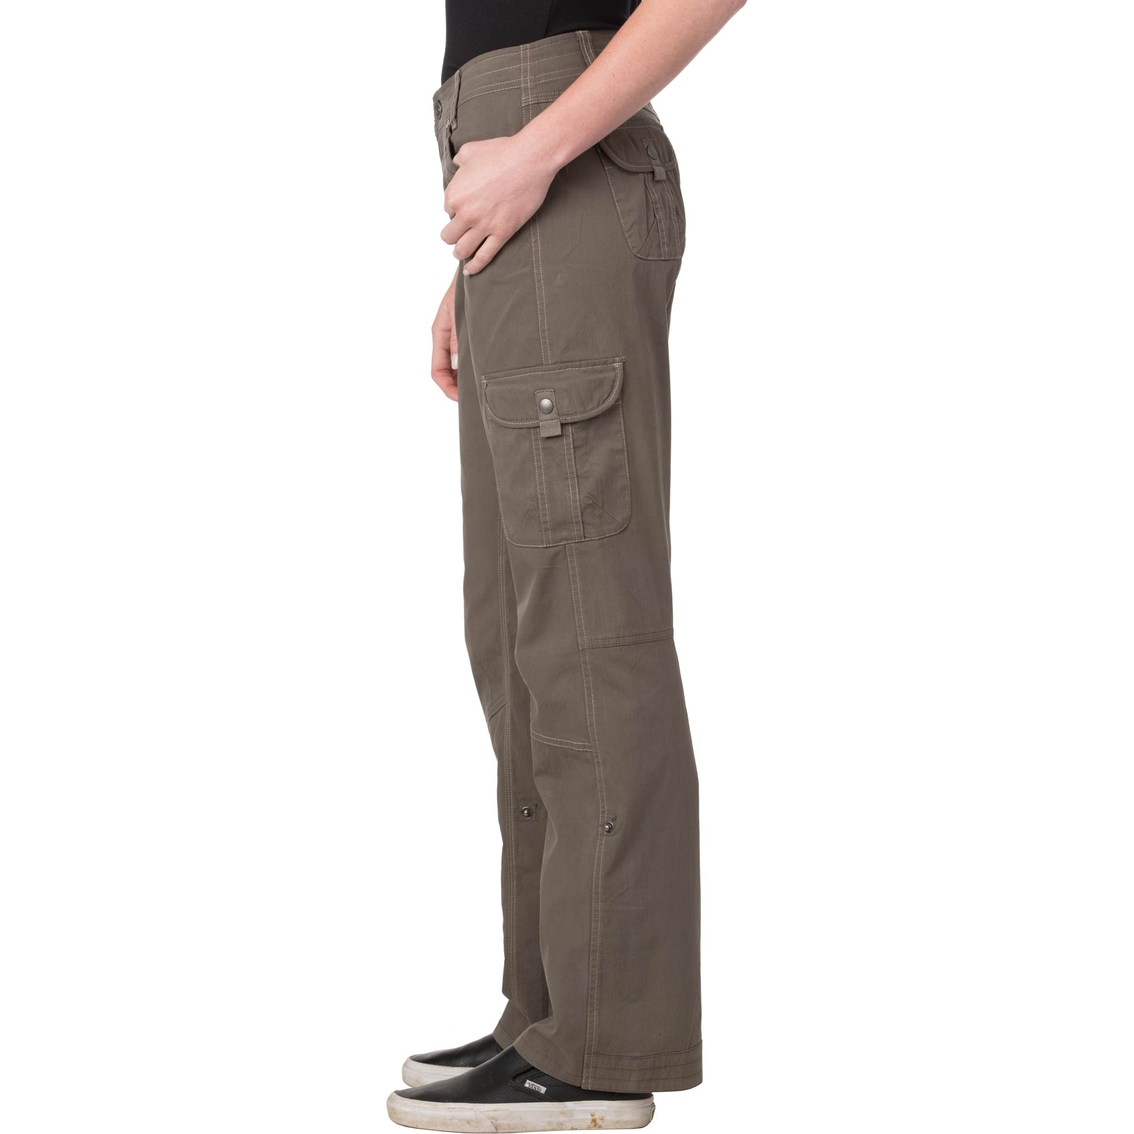 Kuhl Splash 32 In. Roll Up Pants, Pants, Clothing & Accessories